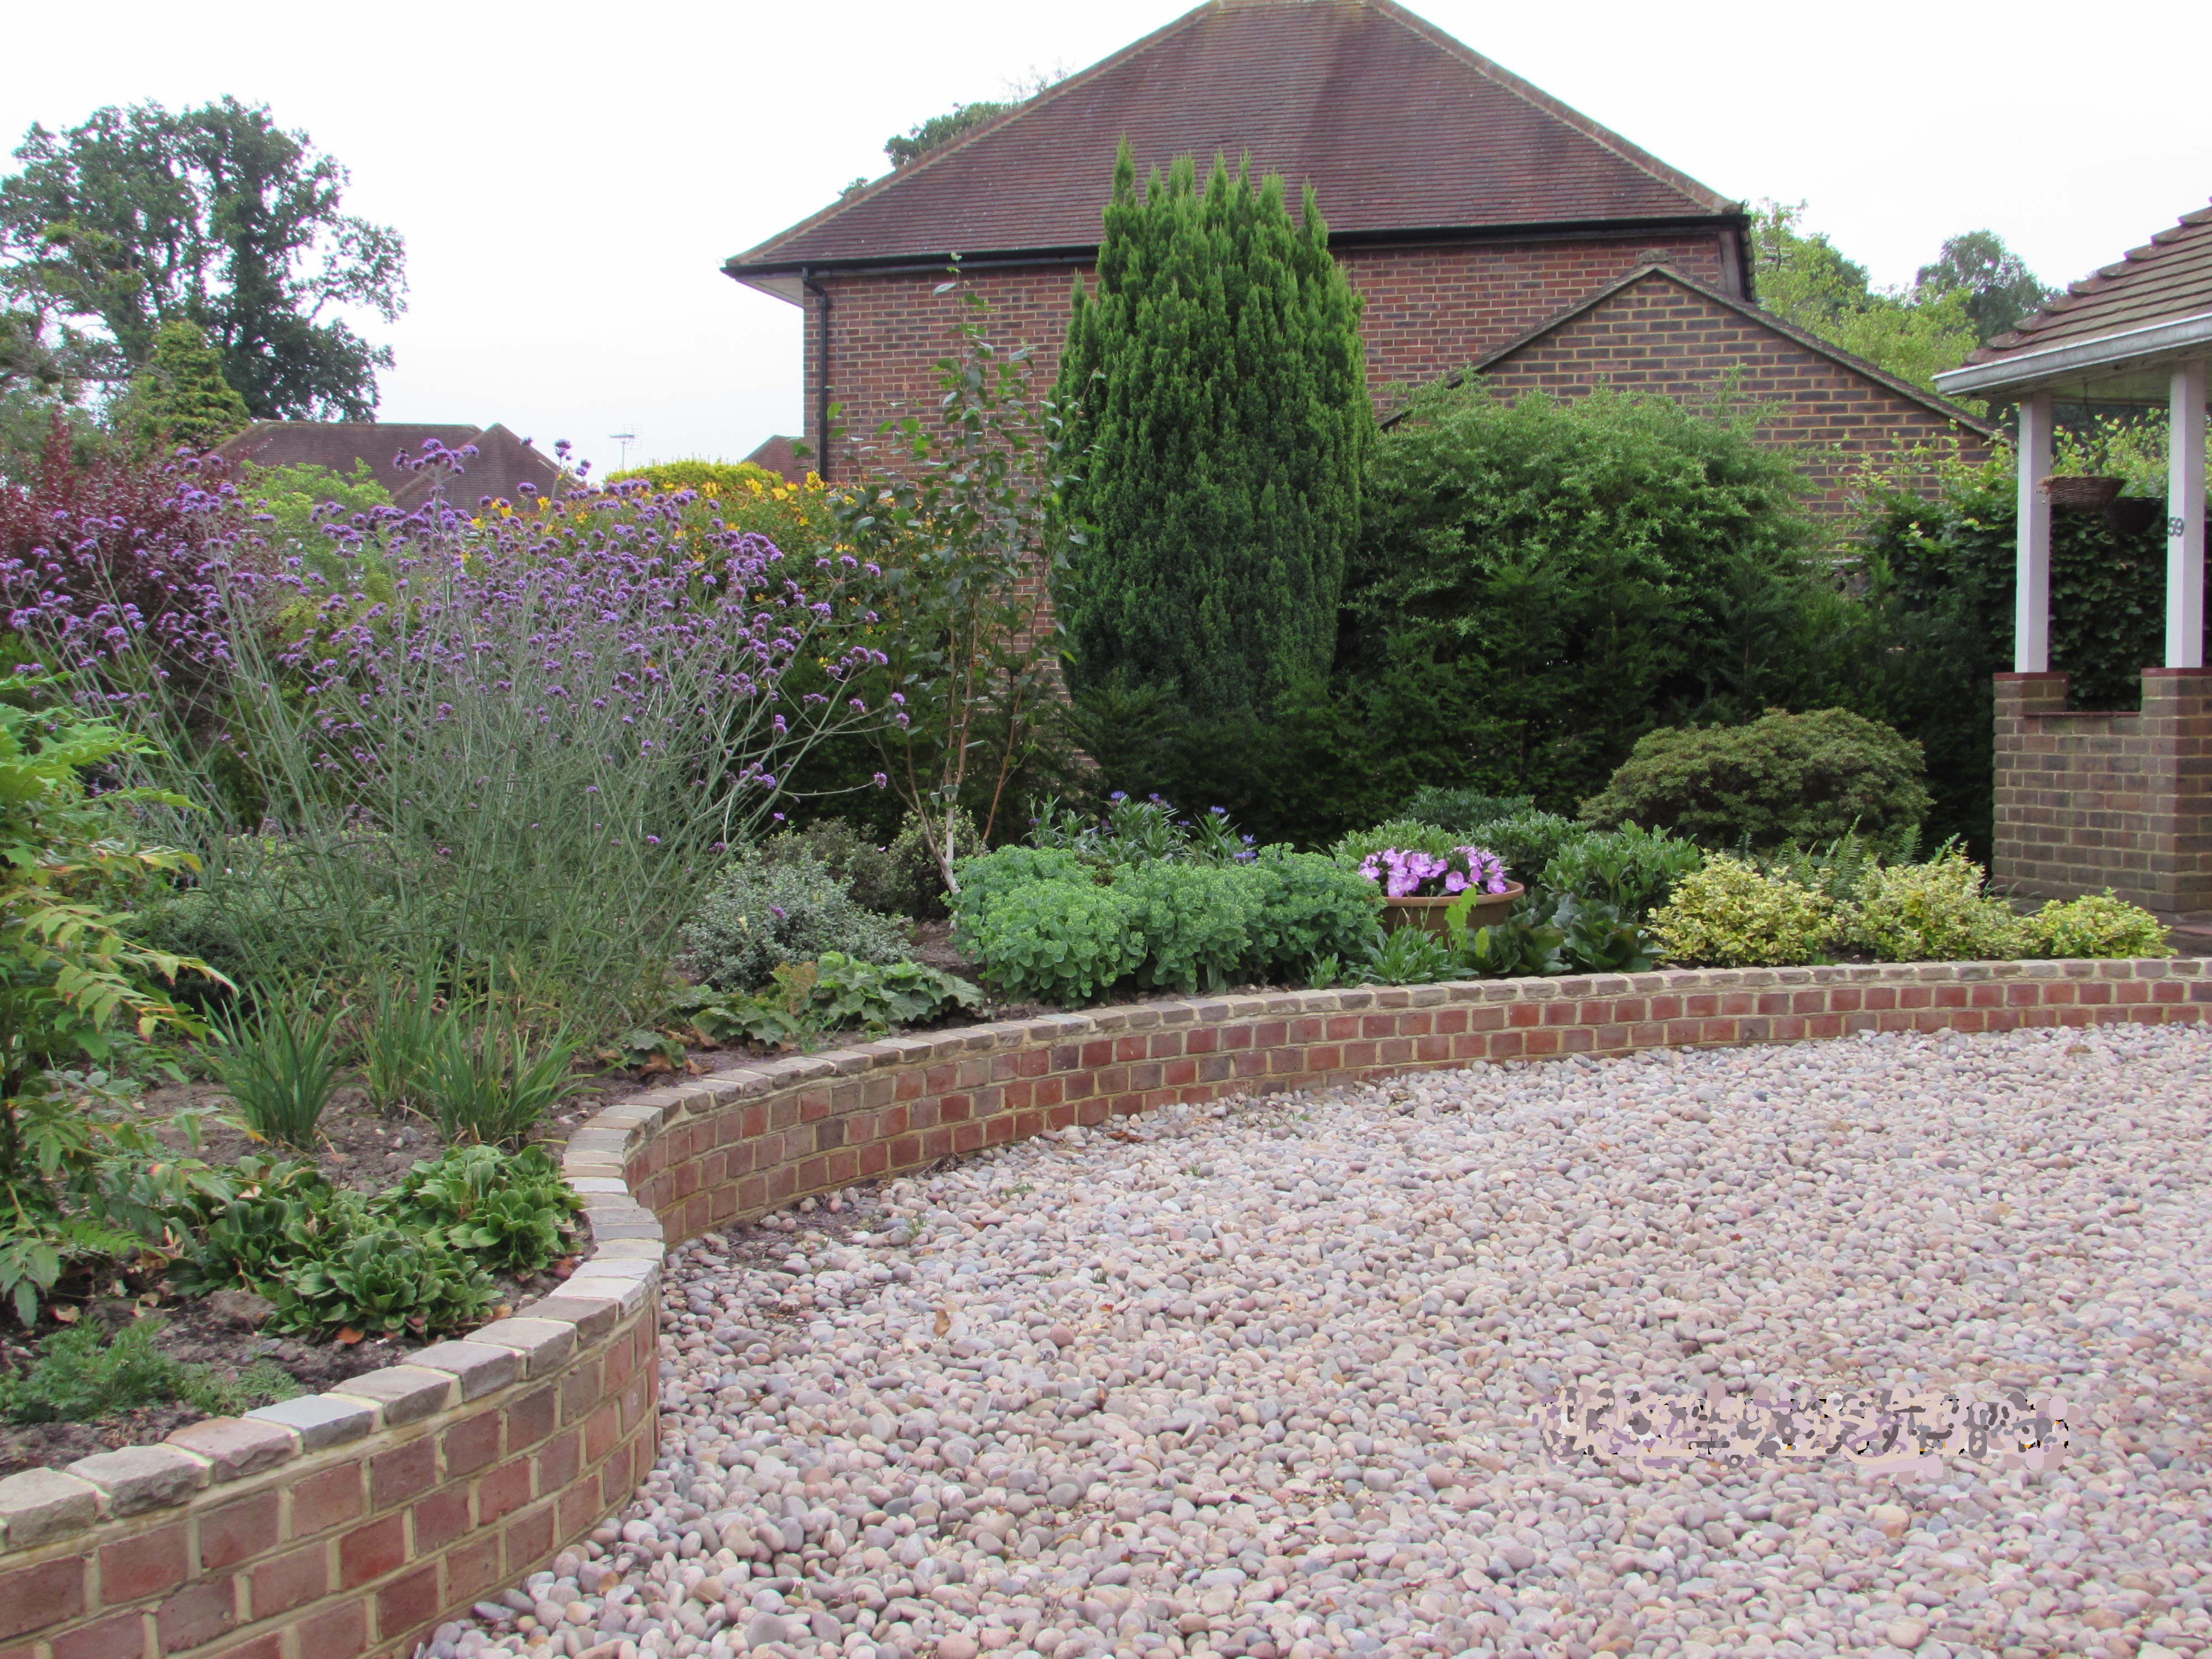 A serpentine low brick wall topped with sandstone